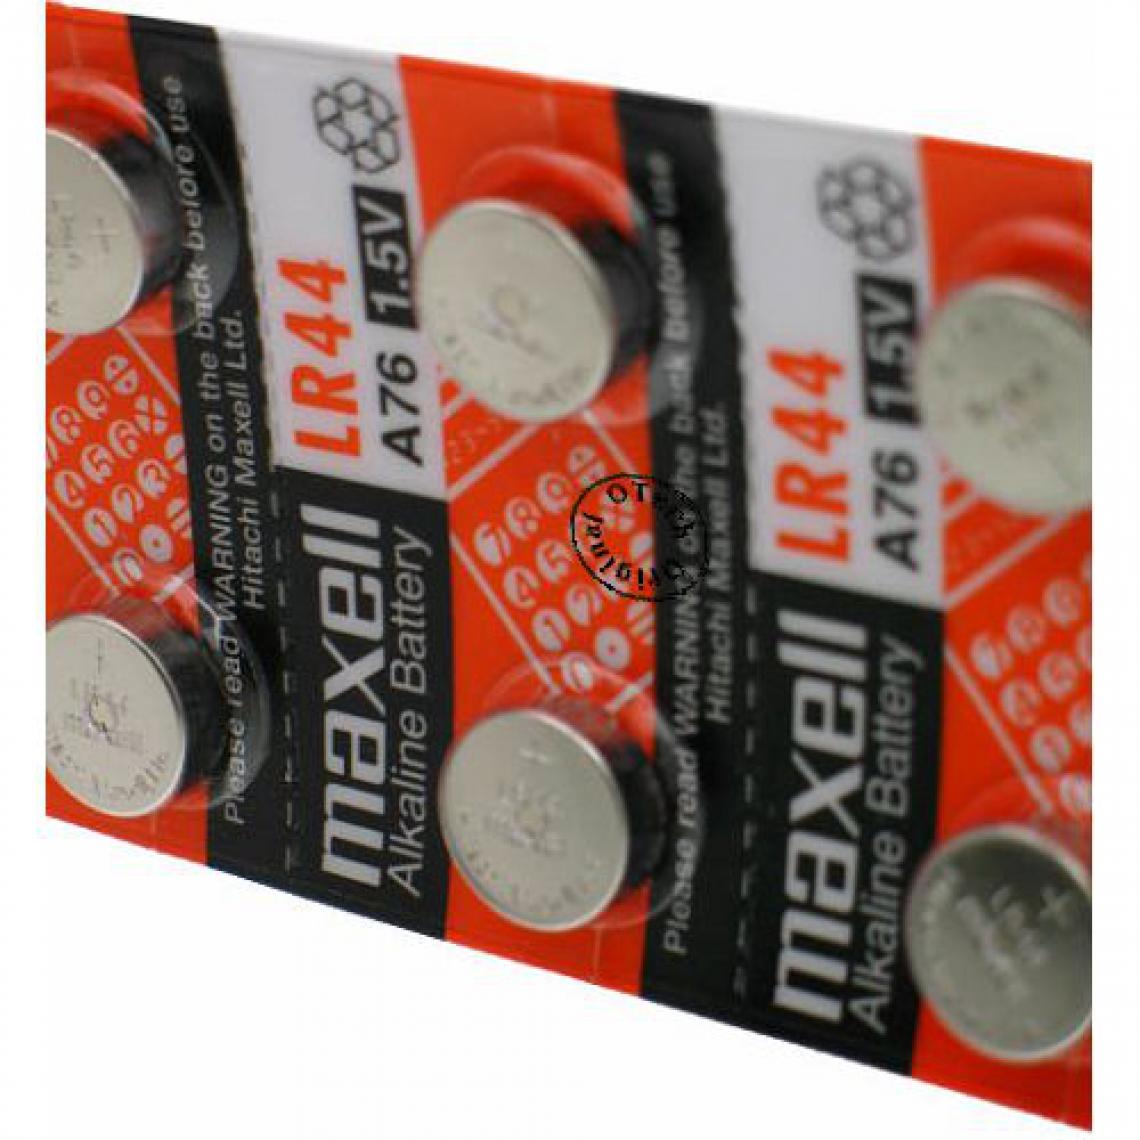 Otech - Pack de 10 piles maxell pour MAXELL 303 - Piles rechargeables